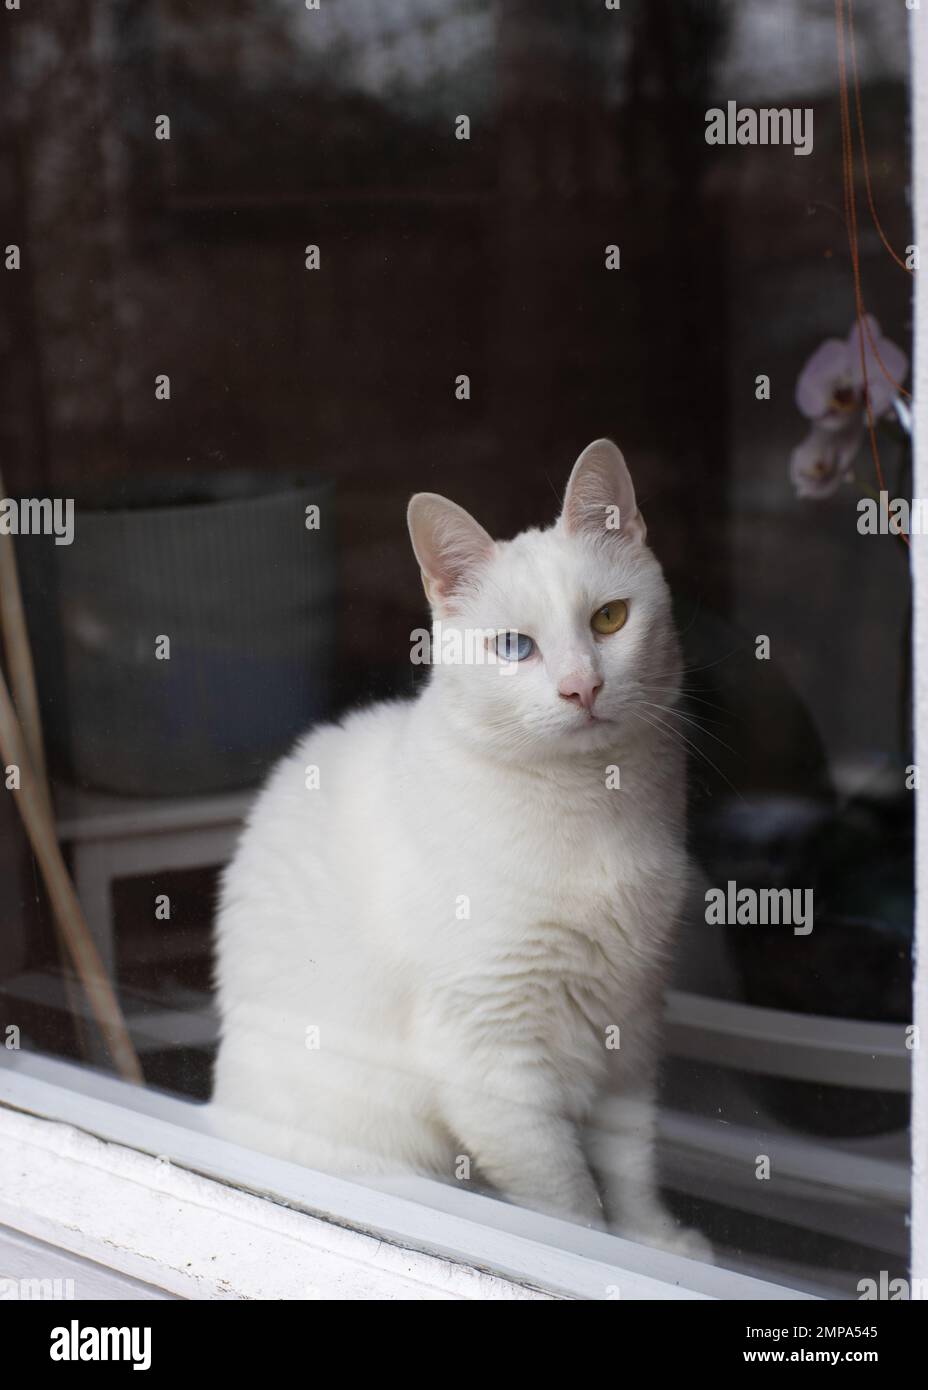 A cute white tomcat with heterochromia iridum is sitting on a window stool and looking through a dirty glass of a window. Stock Photo